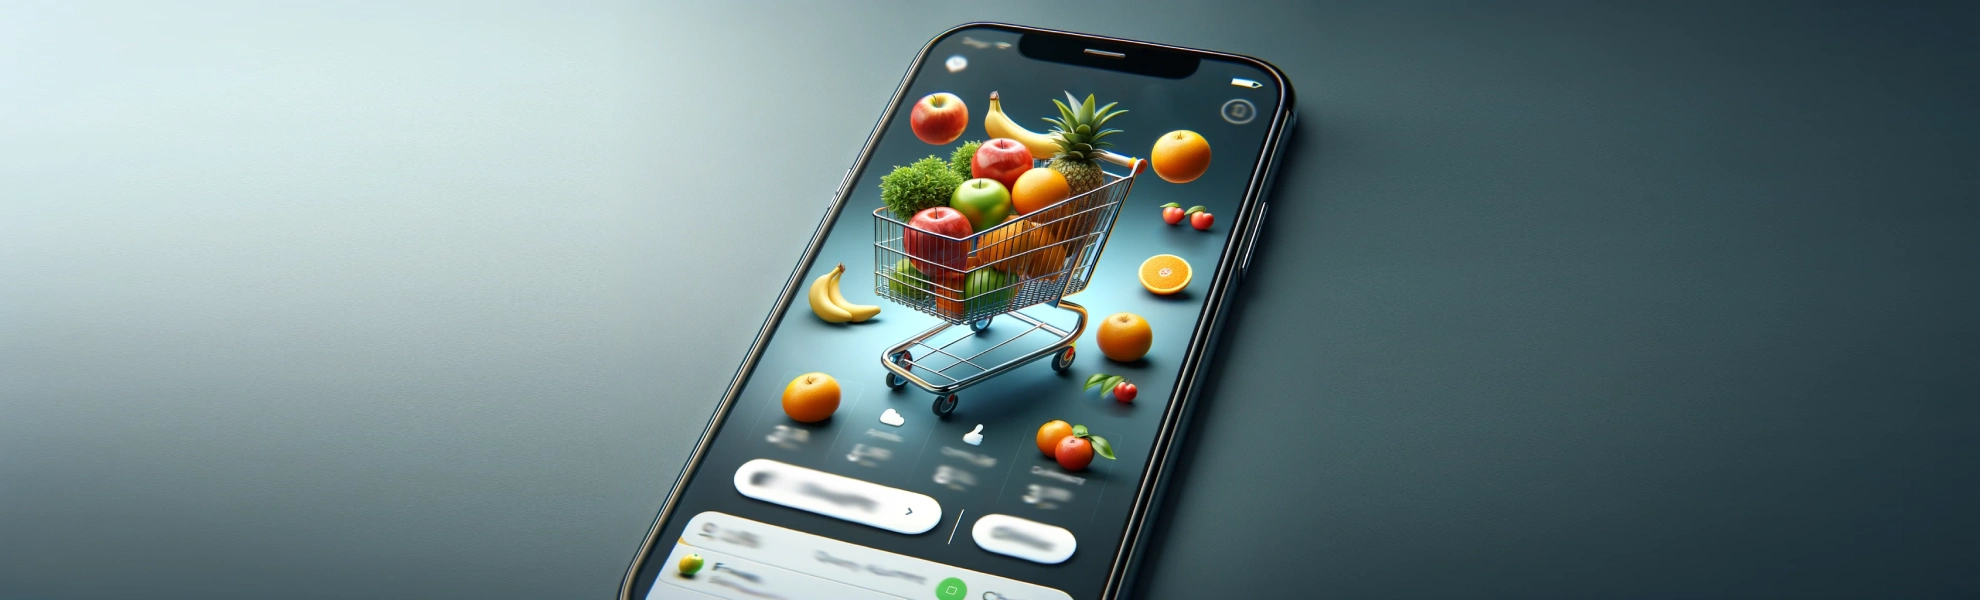 Must-Have Mobile App Features for E-commerce Applications